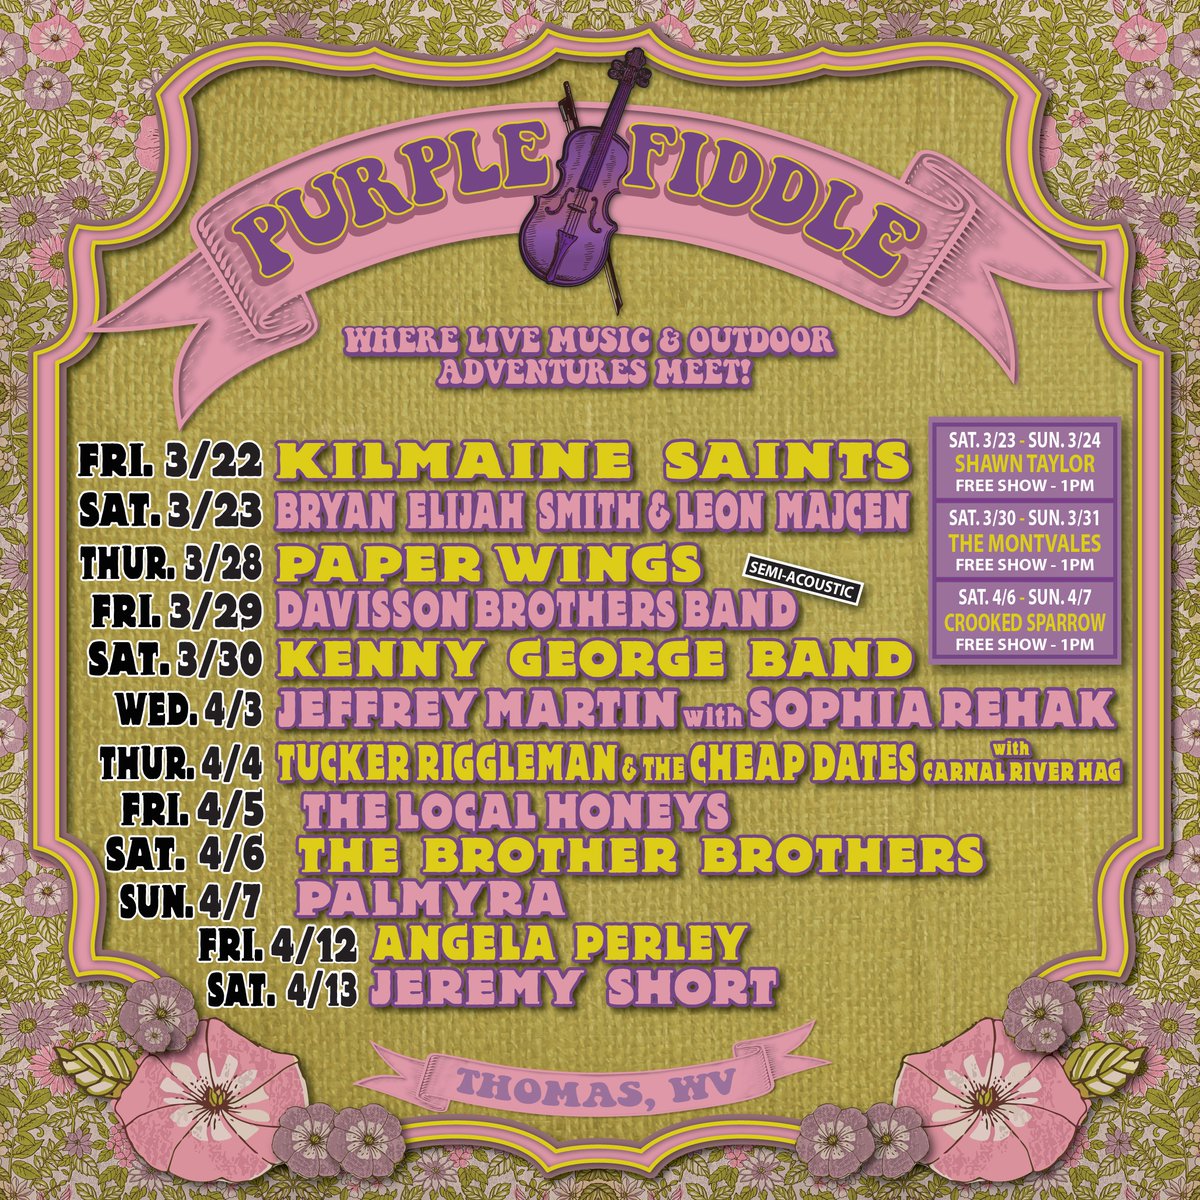 We'll see y'all at @thepurplefiddle March 29th! Tickets available now: bit.ly/4ai2y49